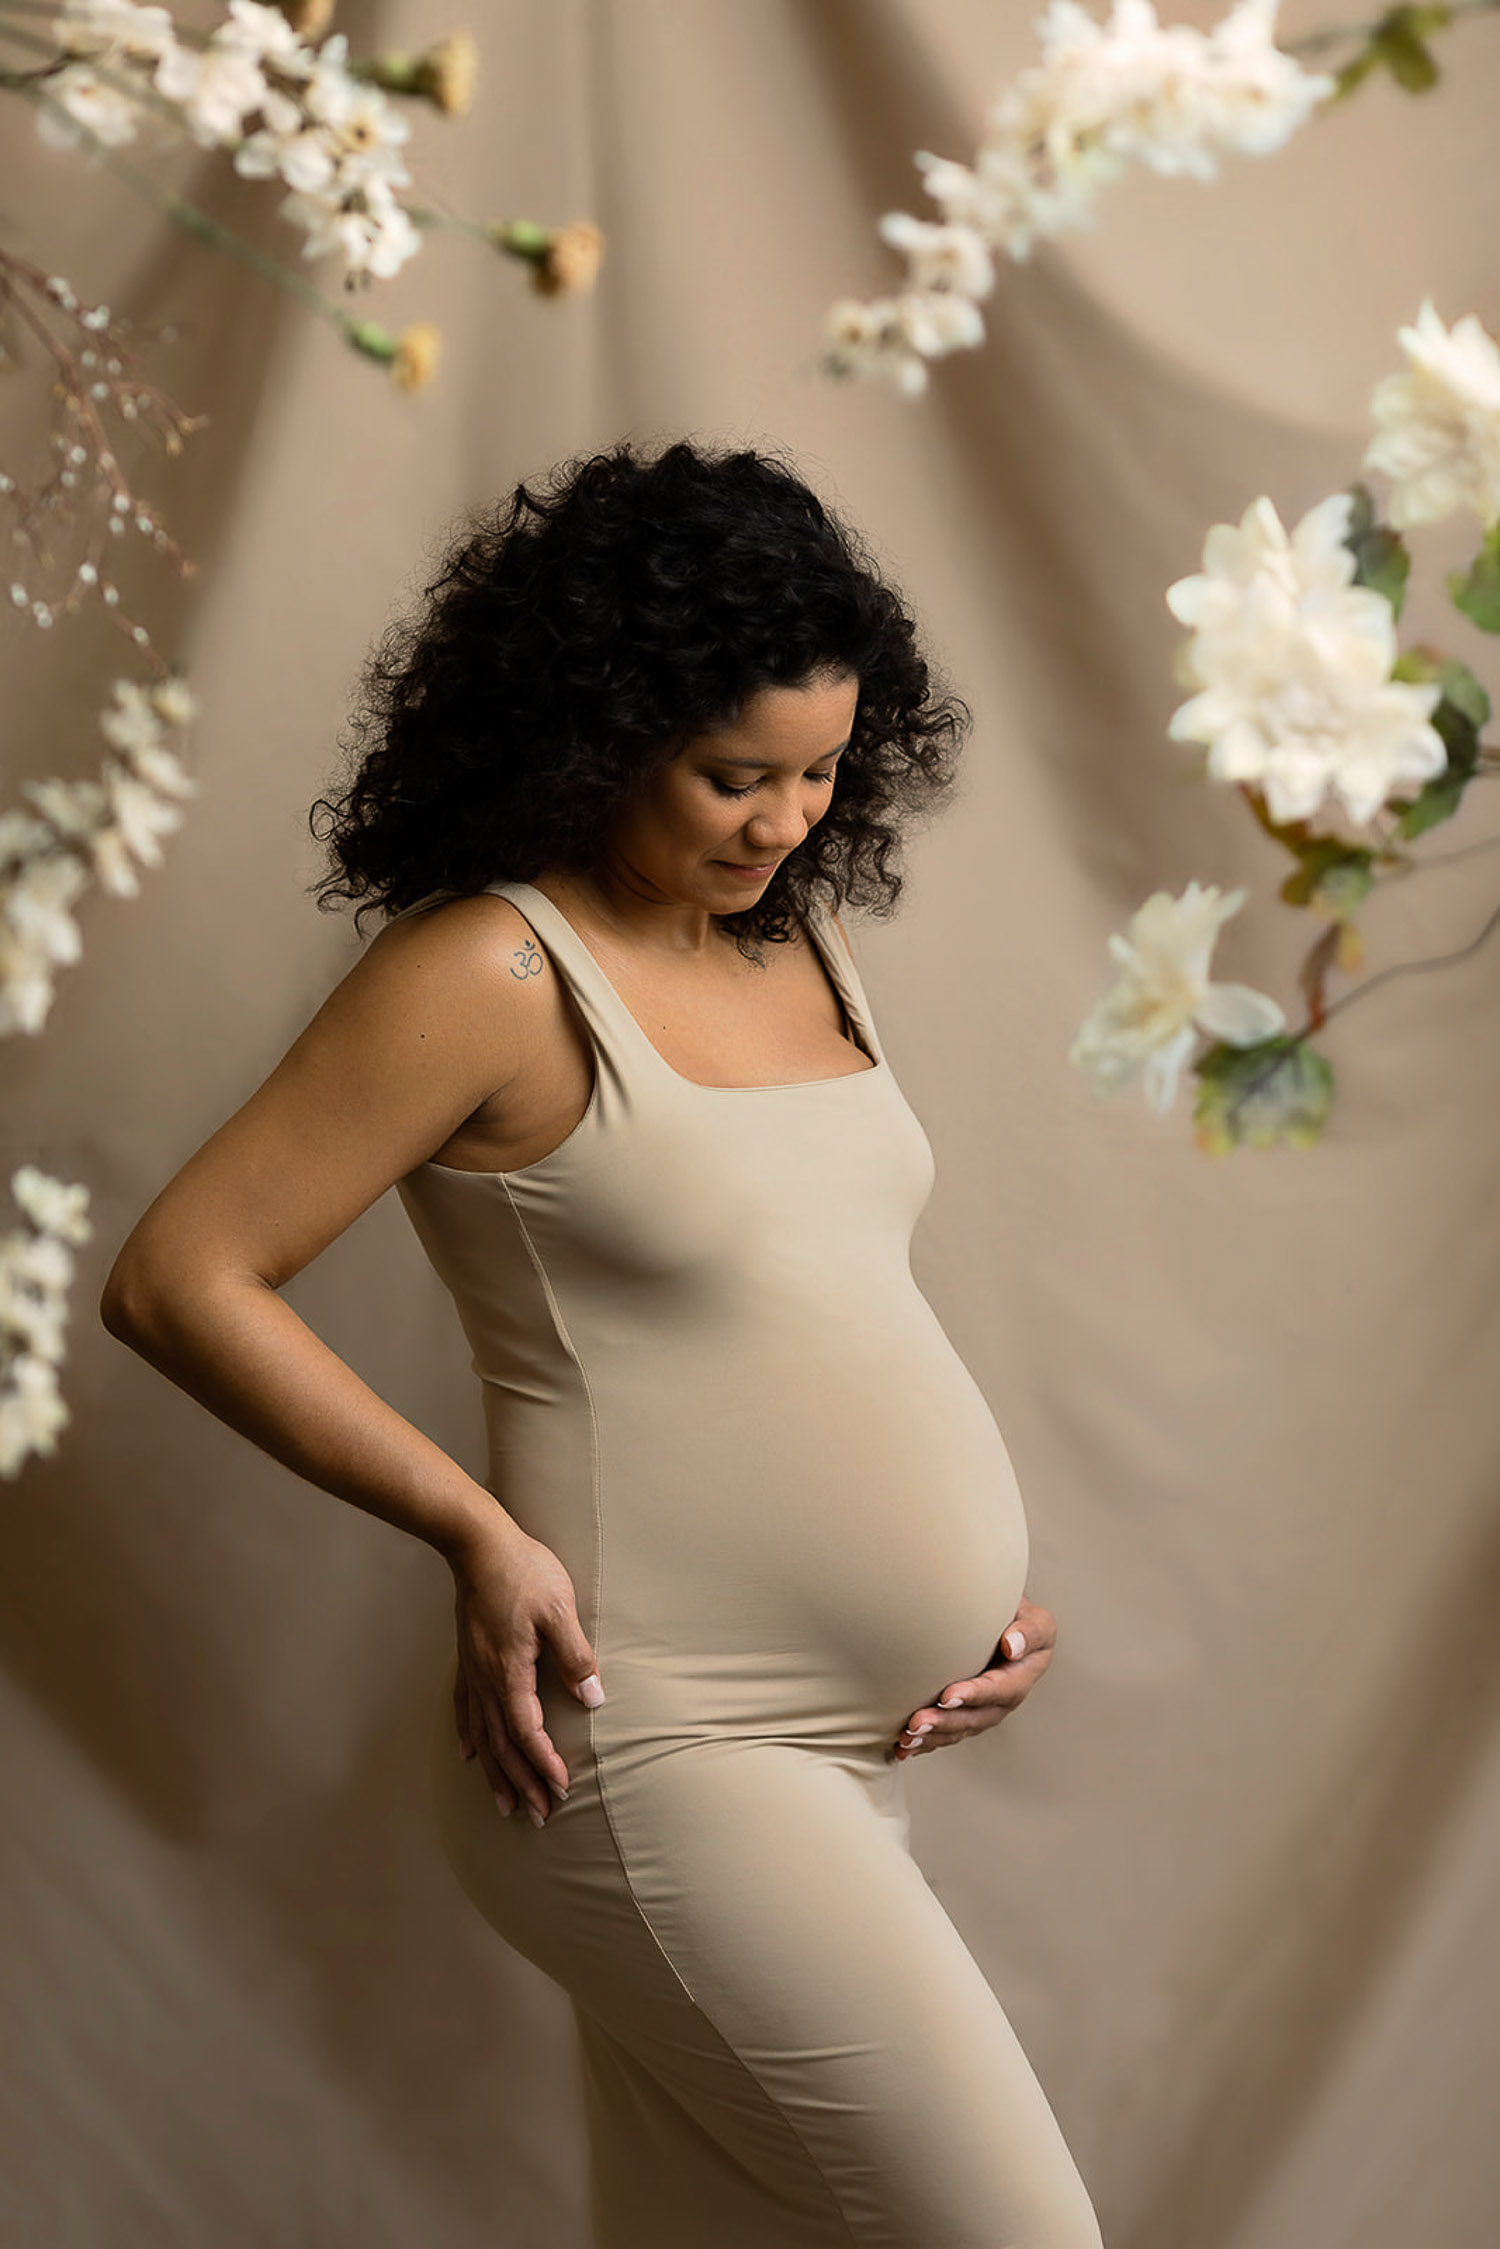 Pregnant woman photographed in studio